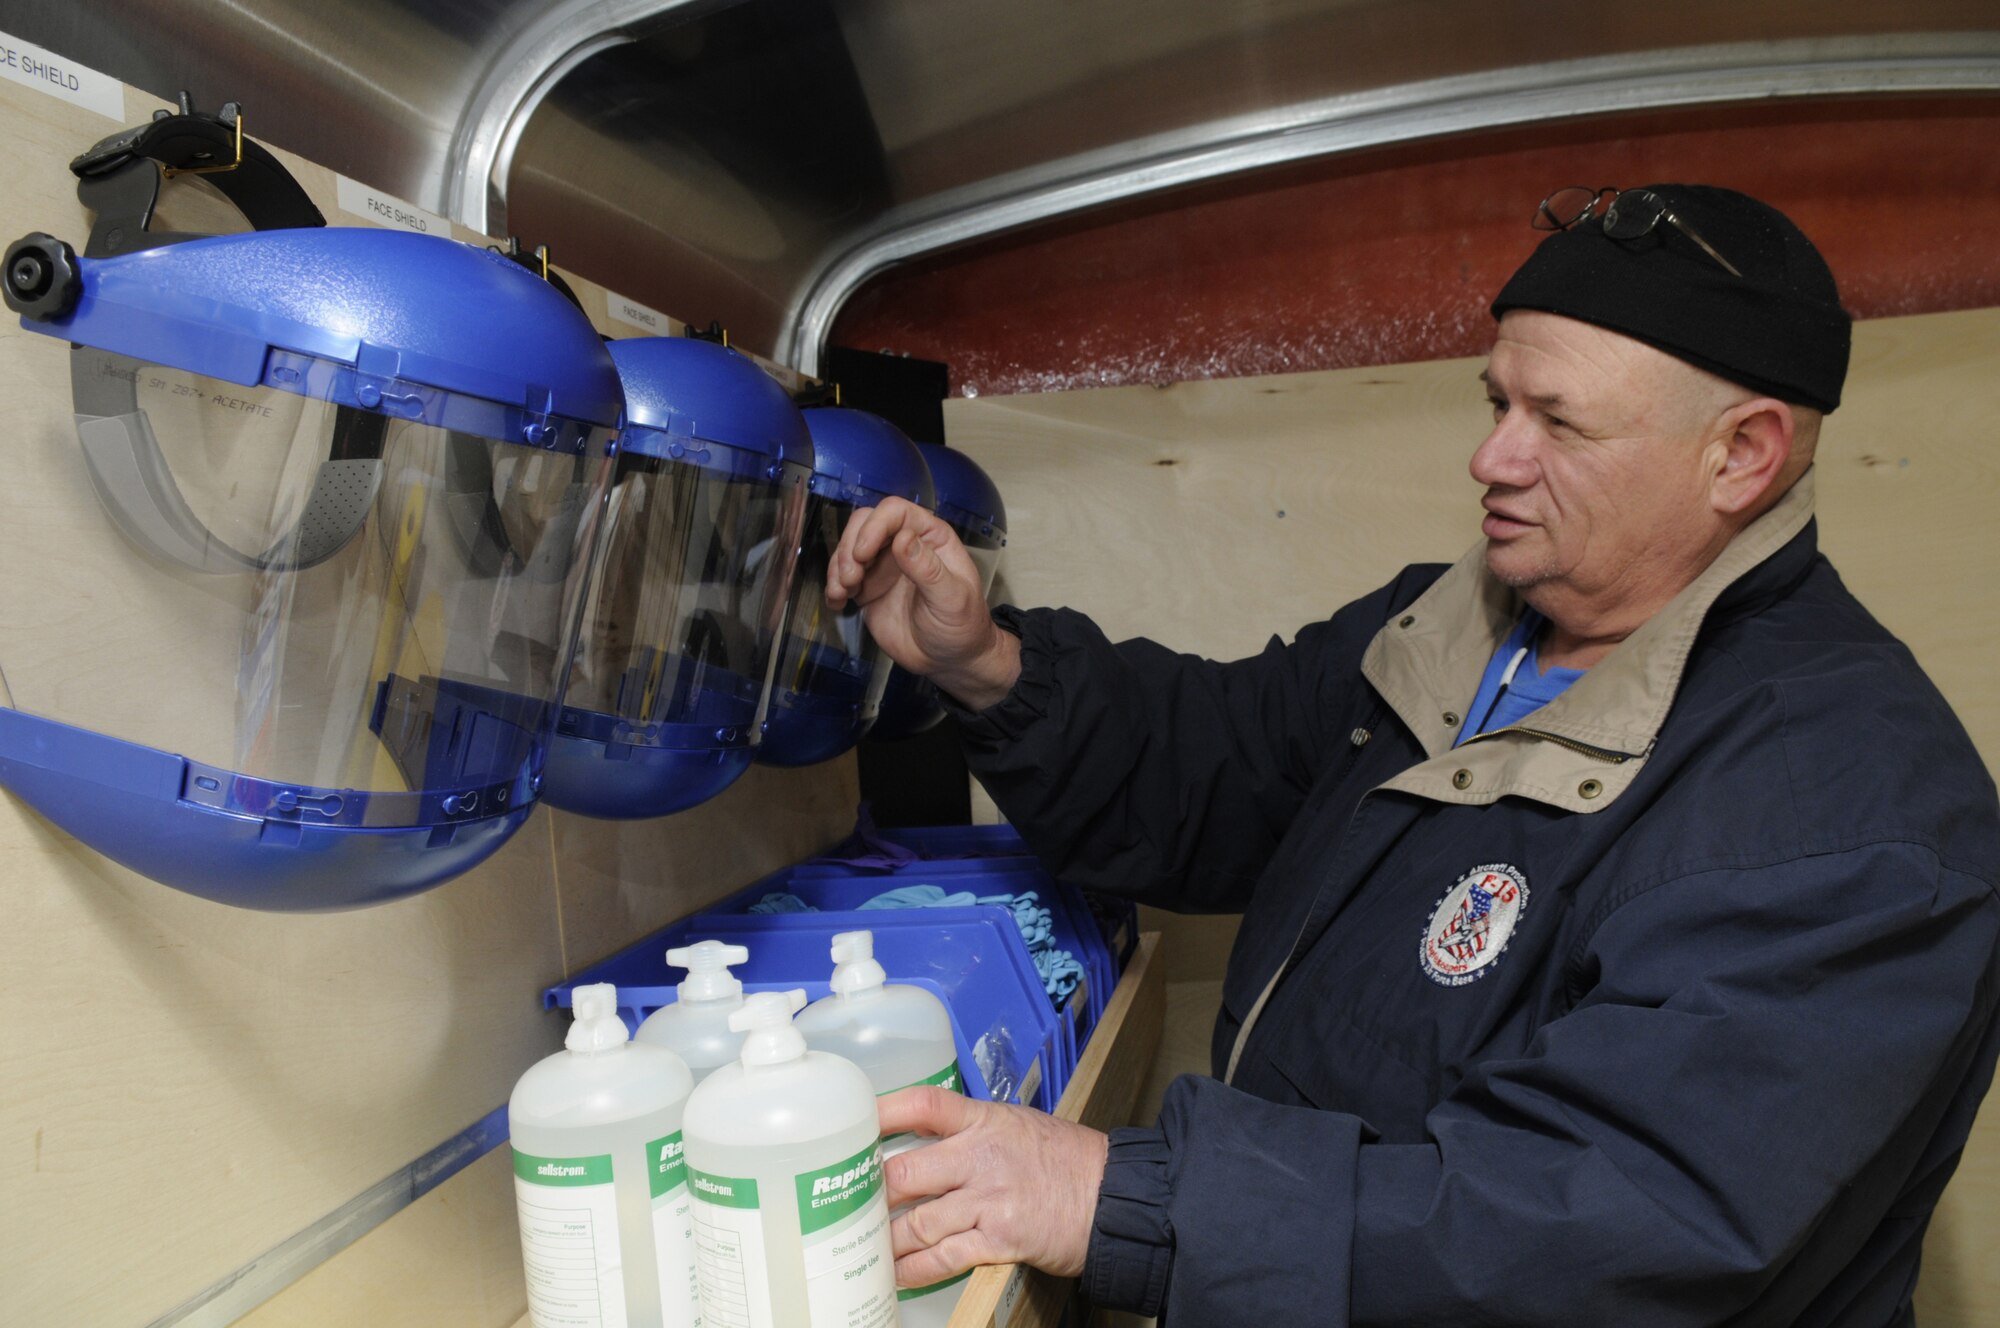 Joe Bossi, environvental specialist, checks the  supplies and protection equipment inside a spill response trailer that workers will need to contain and clean up spills.  U. S. Air Force photo by Sue Sapp